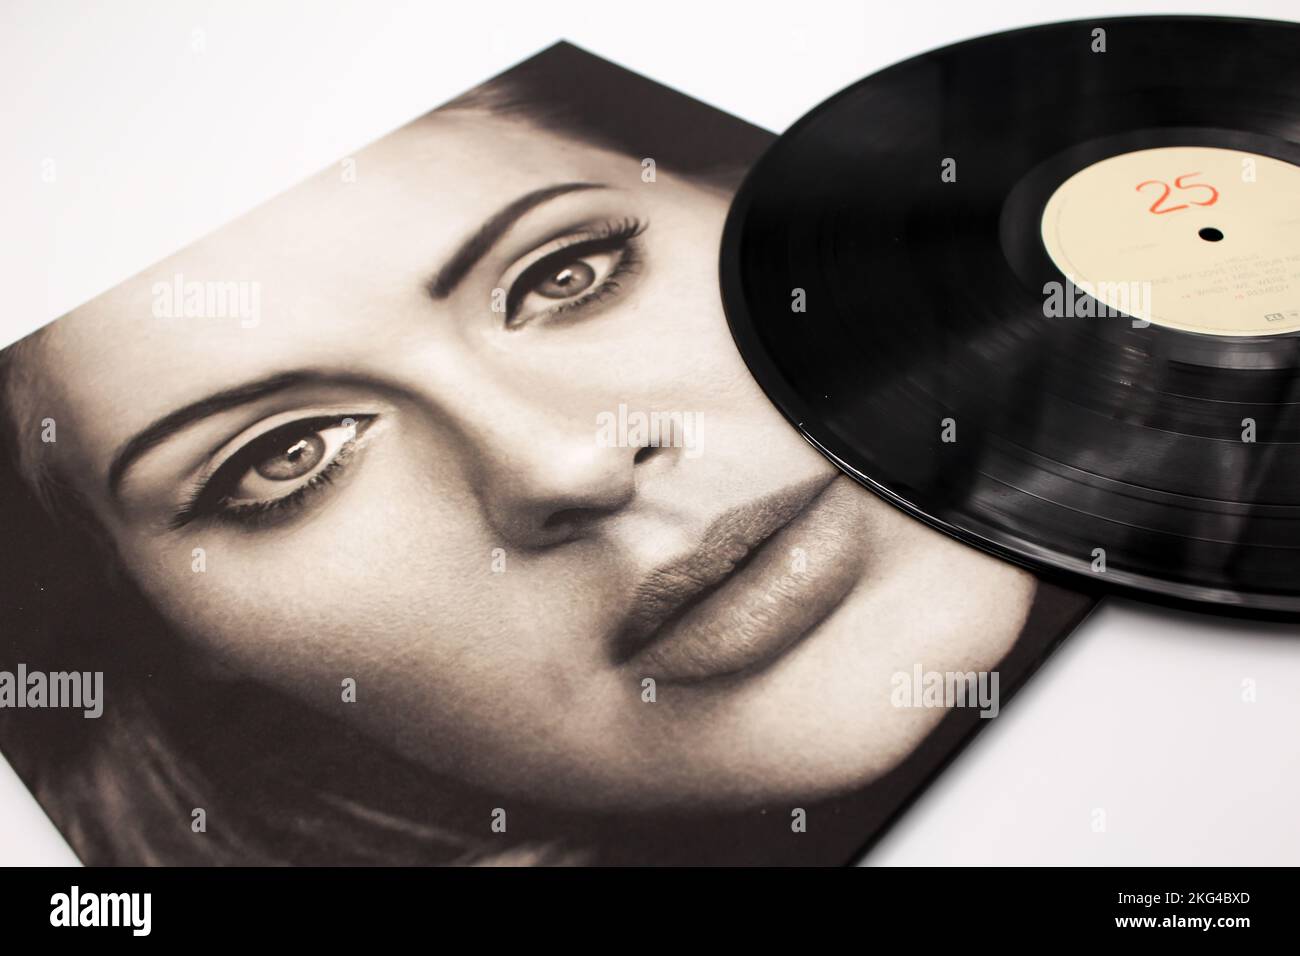 Adele 25 Album Hi-Res Stock Photography And Images - Alamy